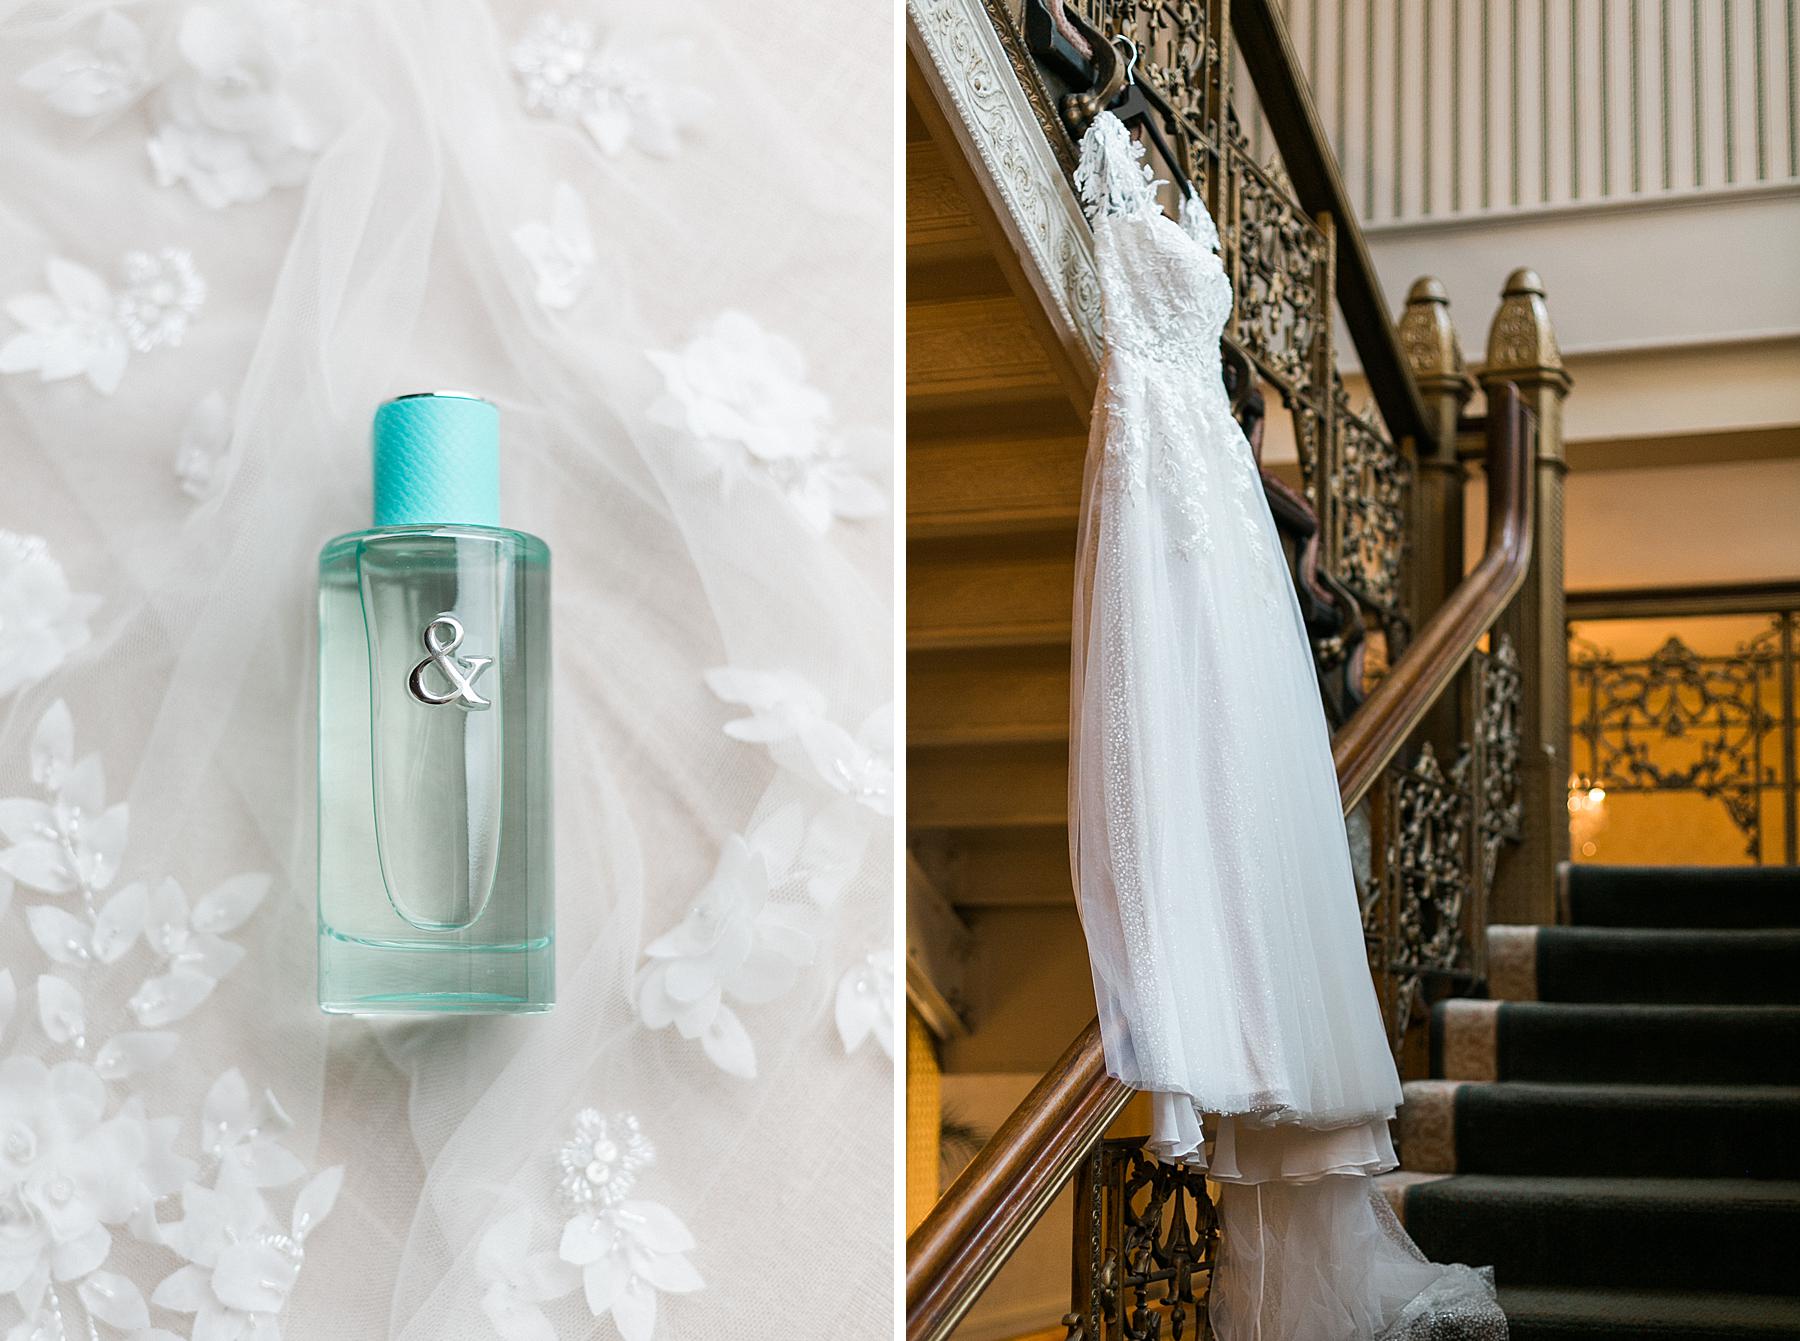 brides gown wedding dress and perfume bottle